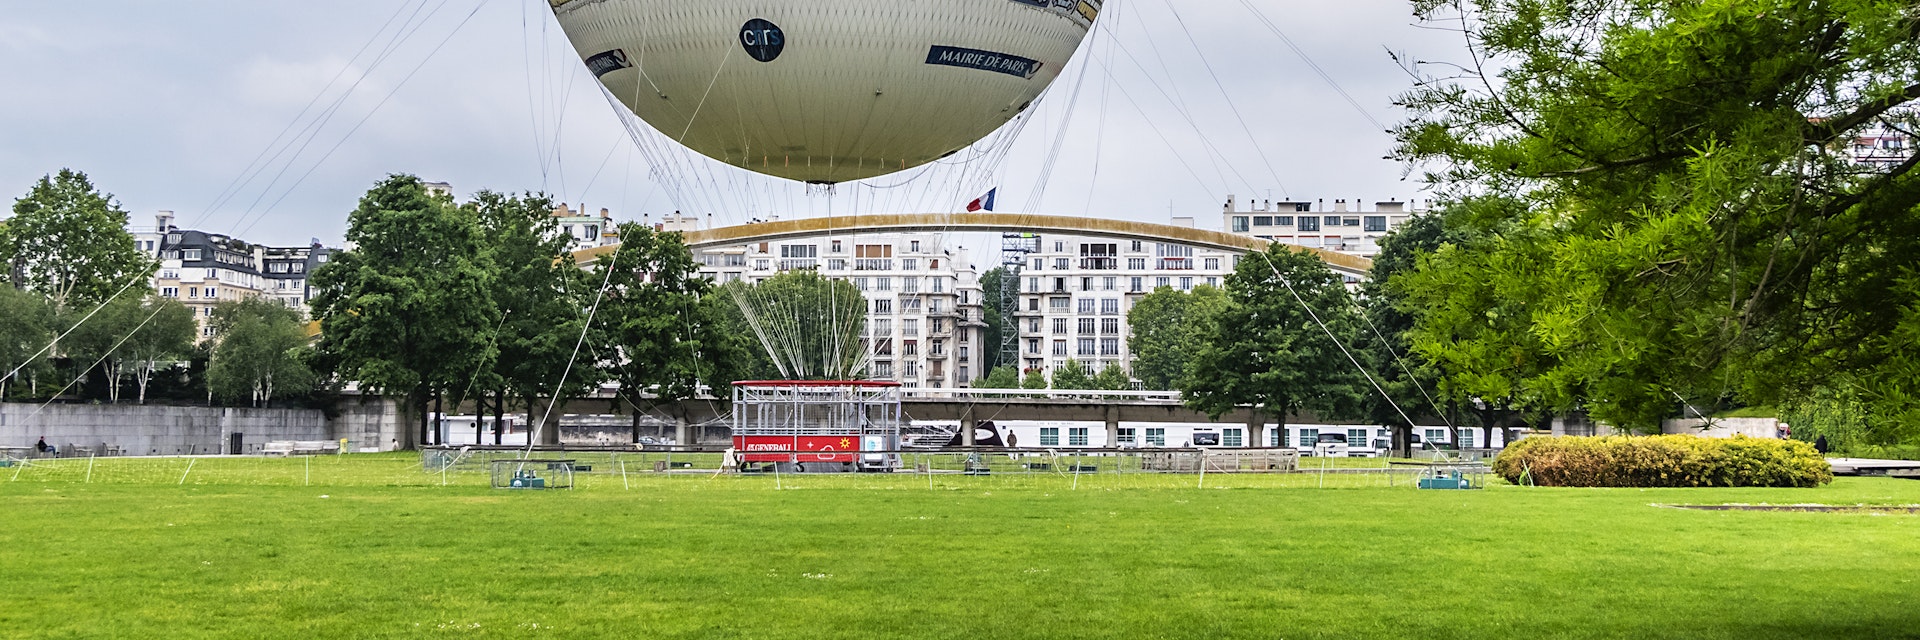 Parc Andre Citroen located on left bank of river Seine with a tethered hot air balloon, Ballon de Paris, allowing visitors to rise above the Paris skyline.